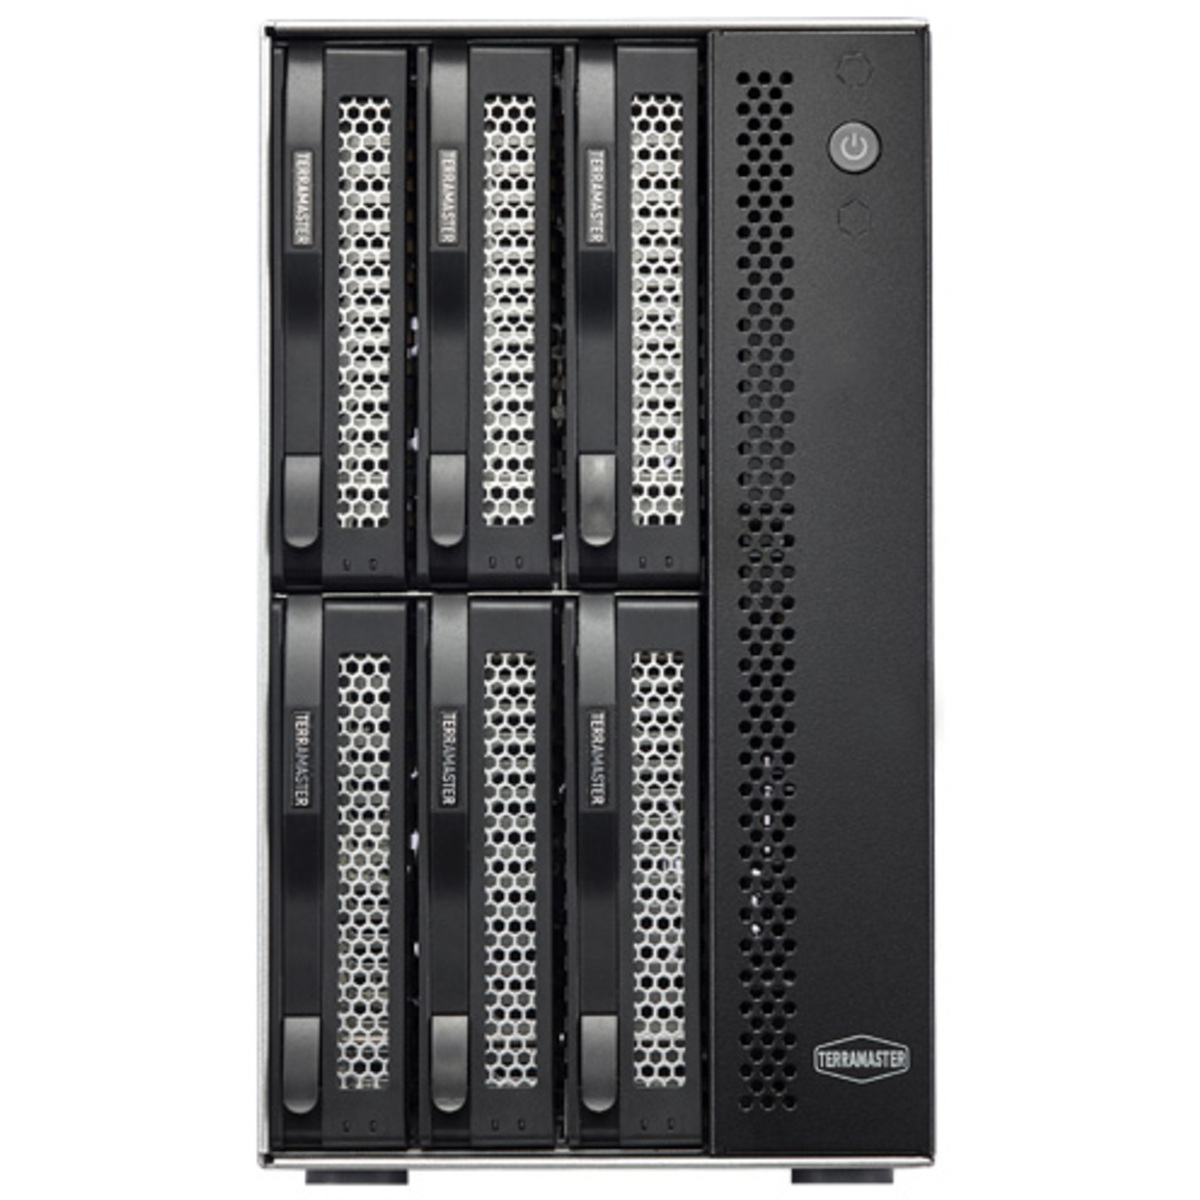 TerraMaster T6-423 48tb 6-Bay Desktop Multimedia / Power User / Business NAS - Network Attached Storage Device 4x12tb Toshiba Enterprise Capacity MG07ACA12TE 3.5 7200rpm SATA 6Gb/s HDD ENTERPRISE Class Drives Installed - Burn-In Tested - FREE RAM UPGRADE T6-423